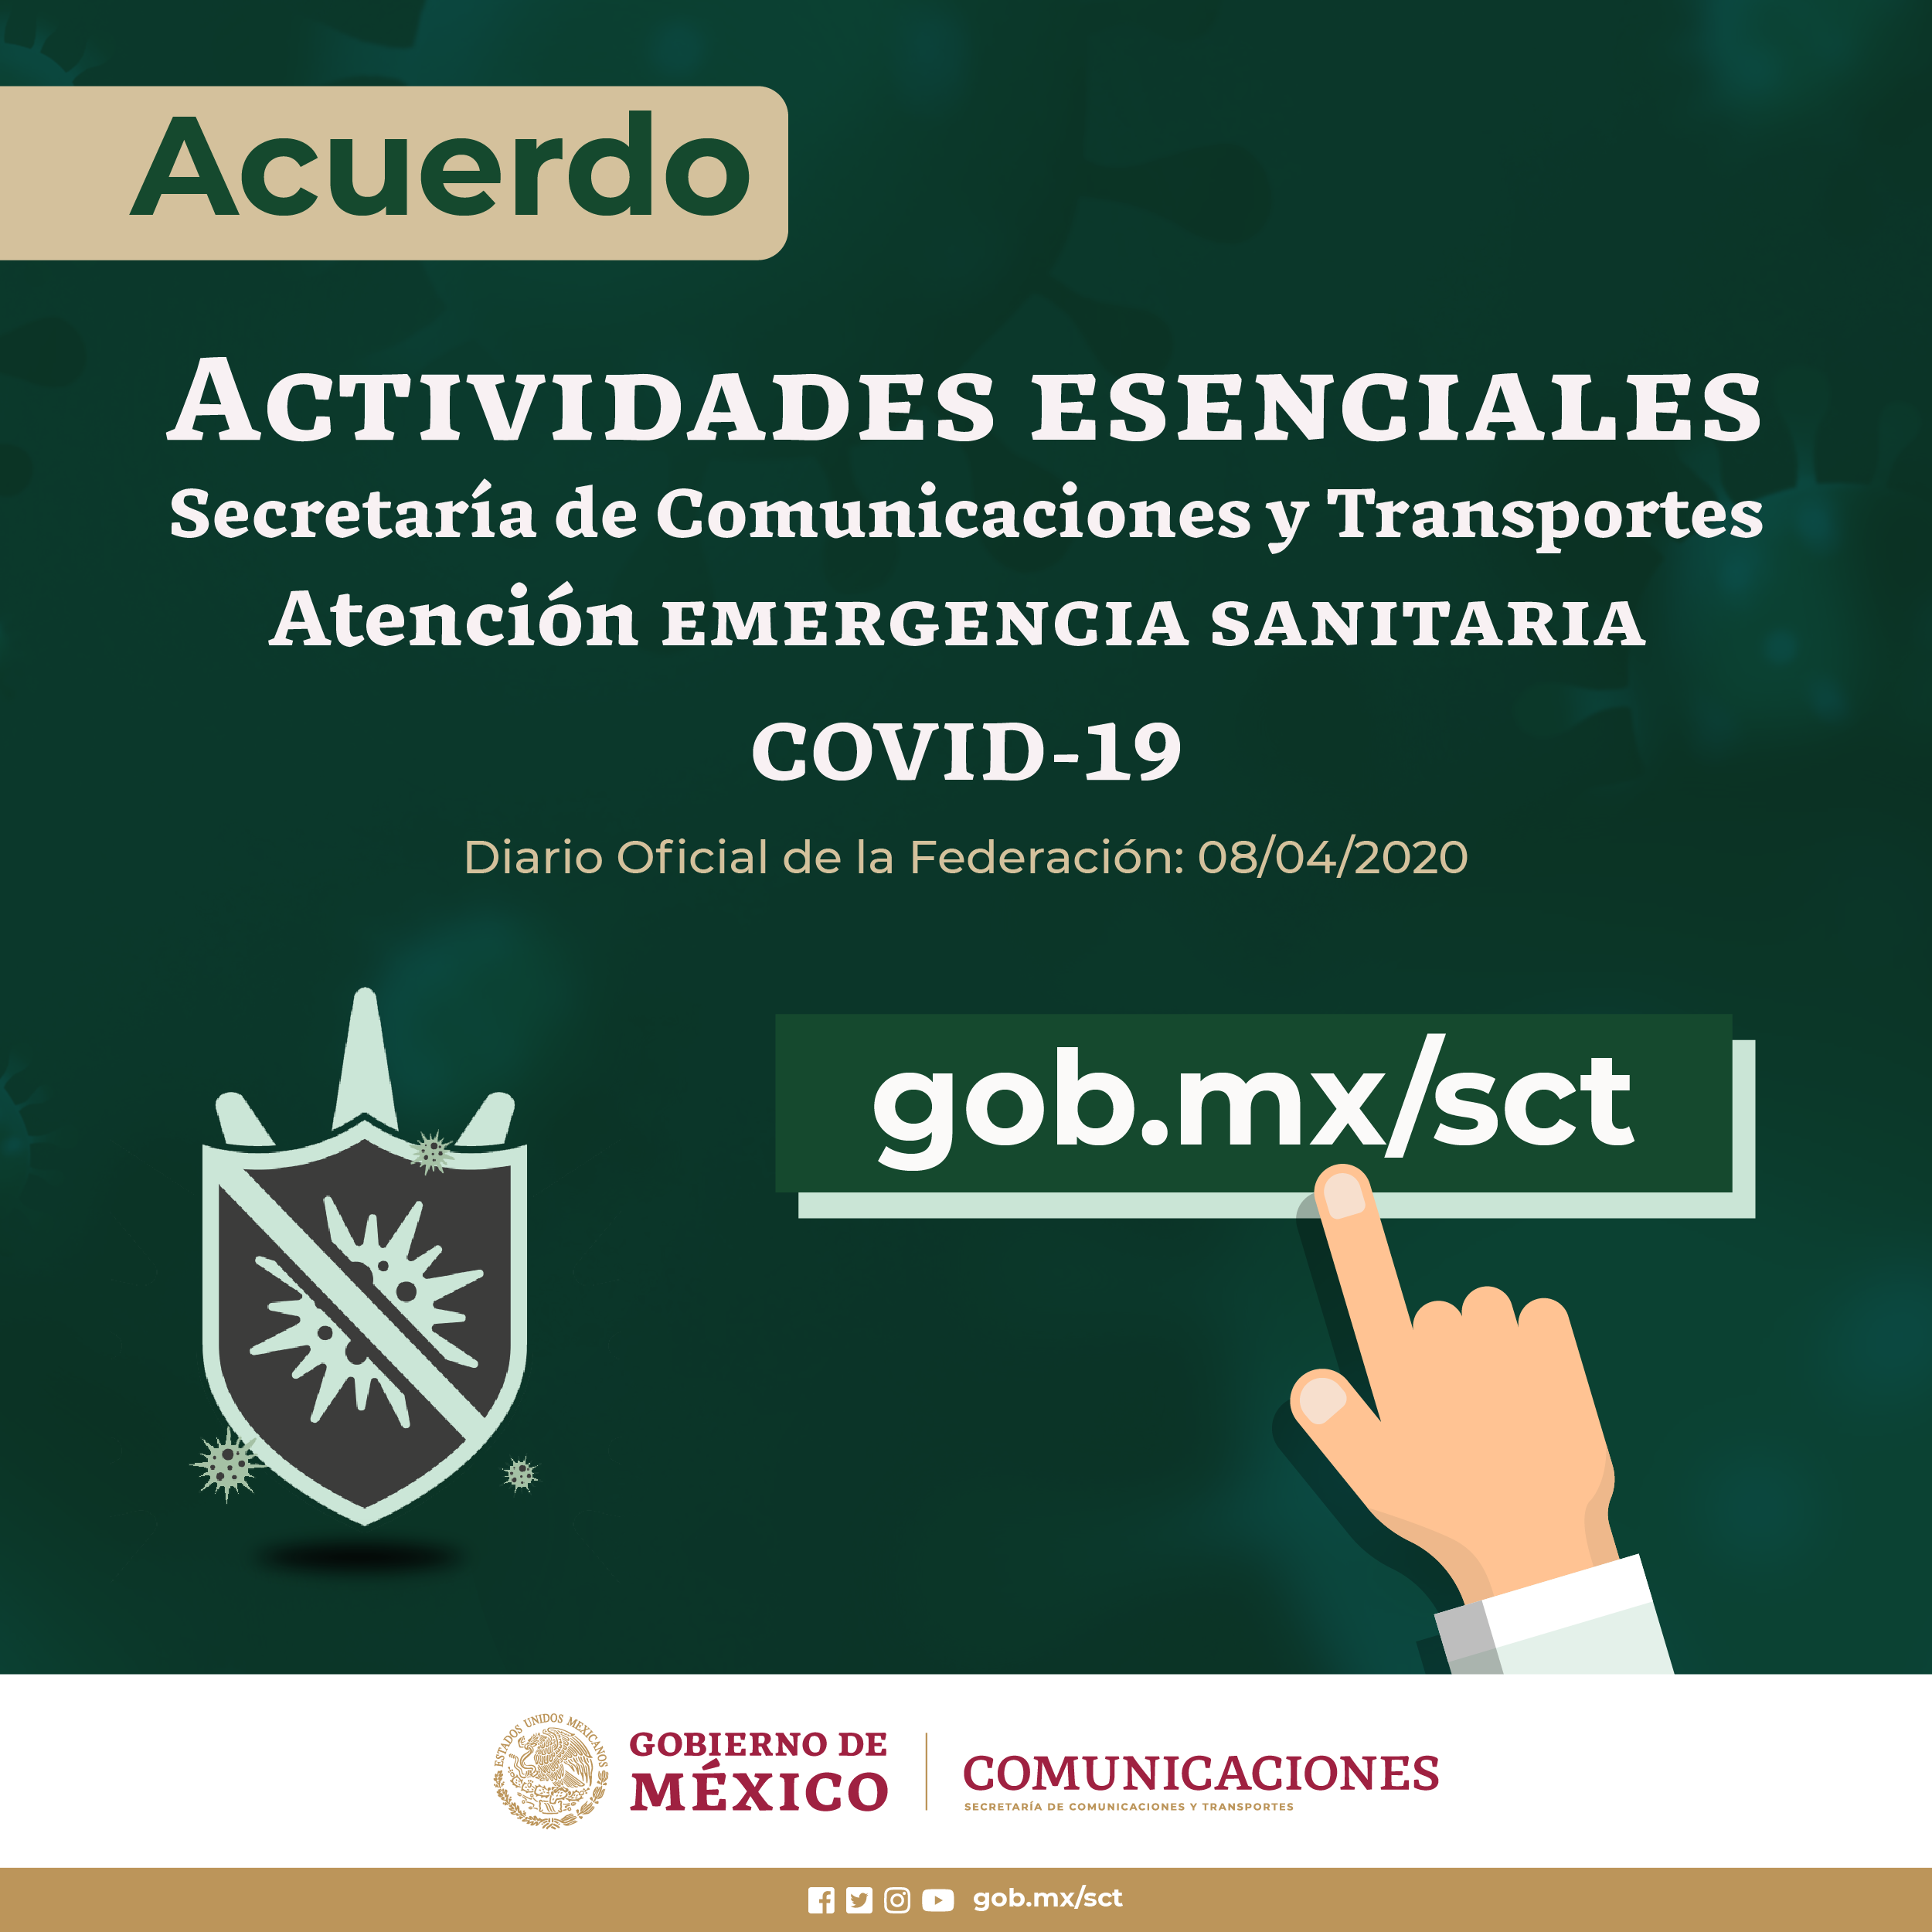 /cms/uploads/image/file/577145/Actividades_Esenciales_COVID19_SCT.png